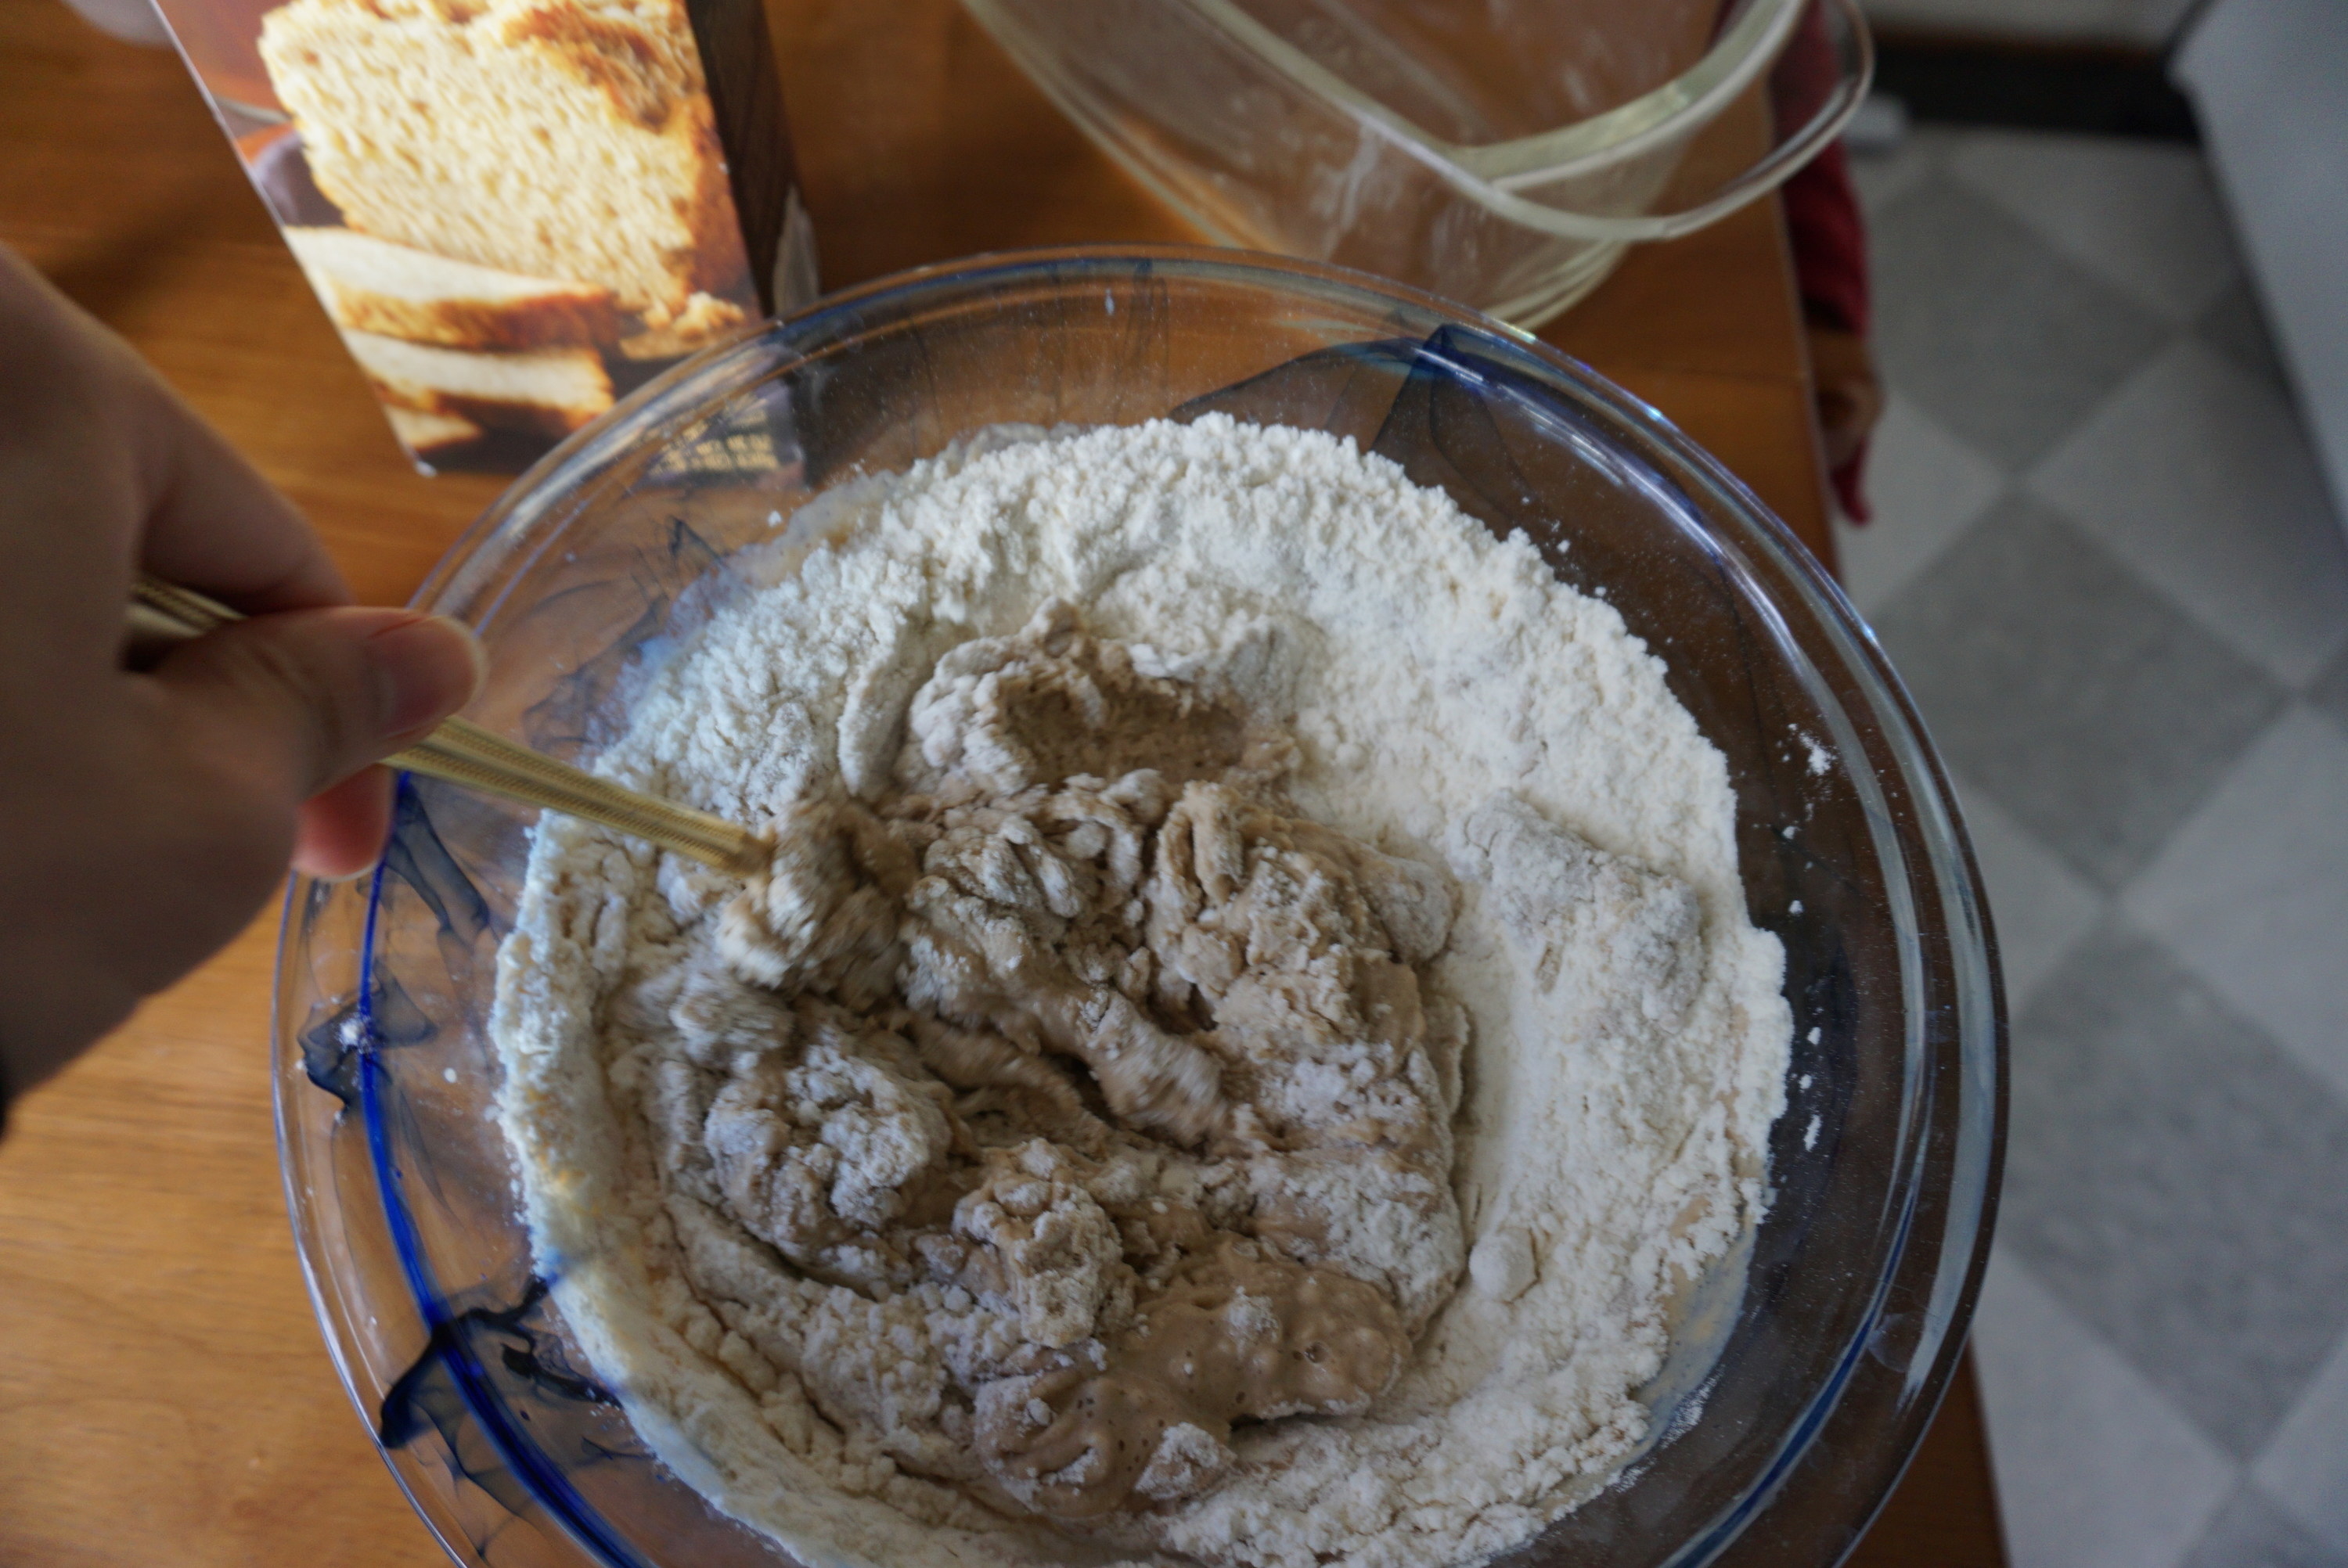 Author mixing the beer bread mix